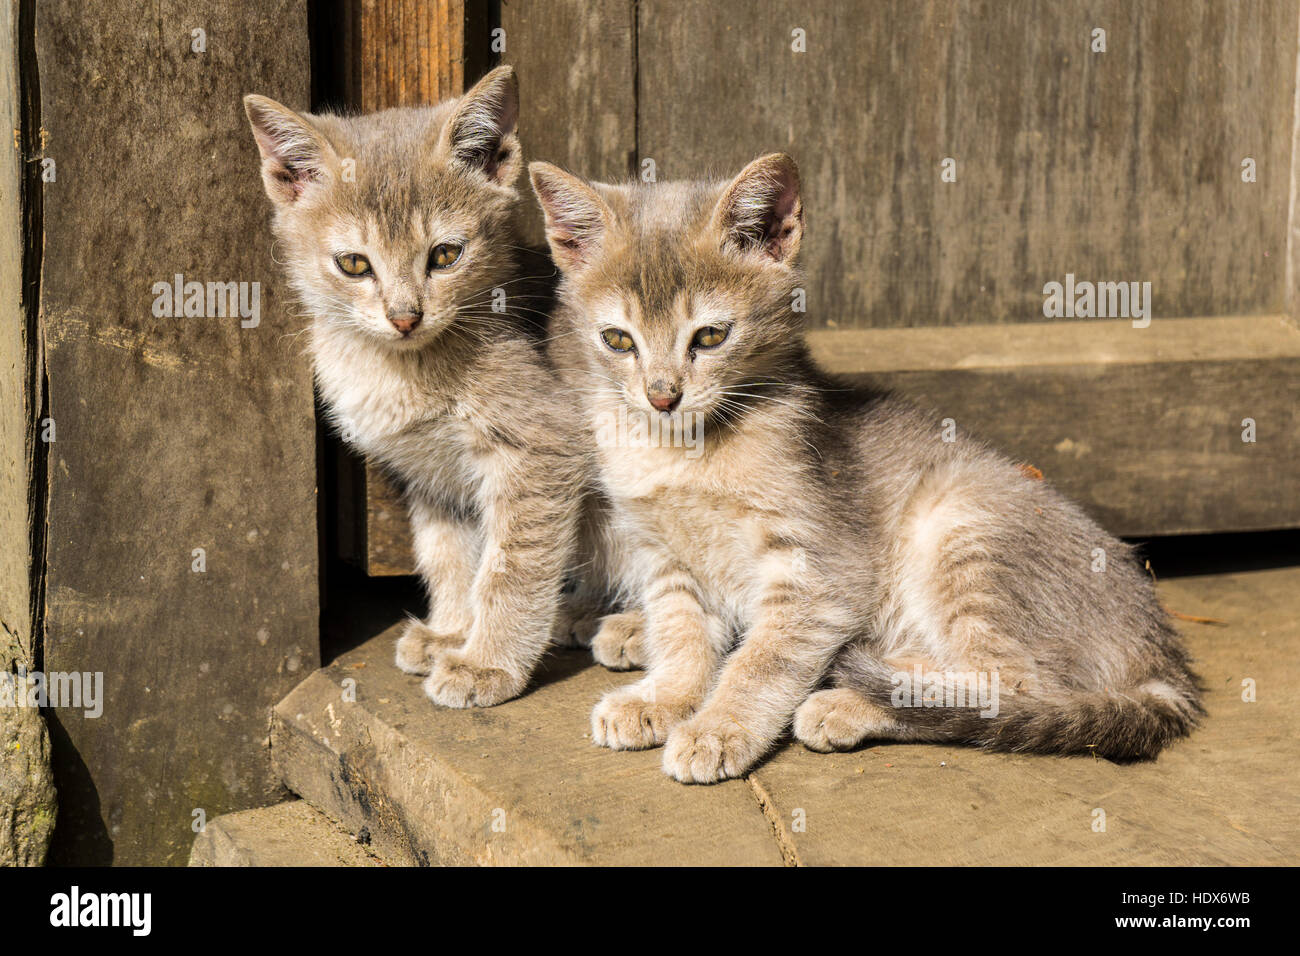 Two baby cats are playing with each other Stock Photo